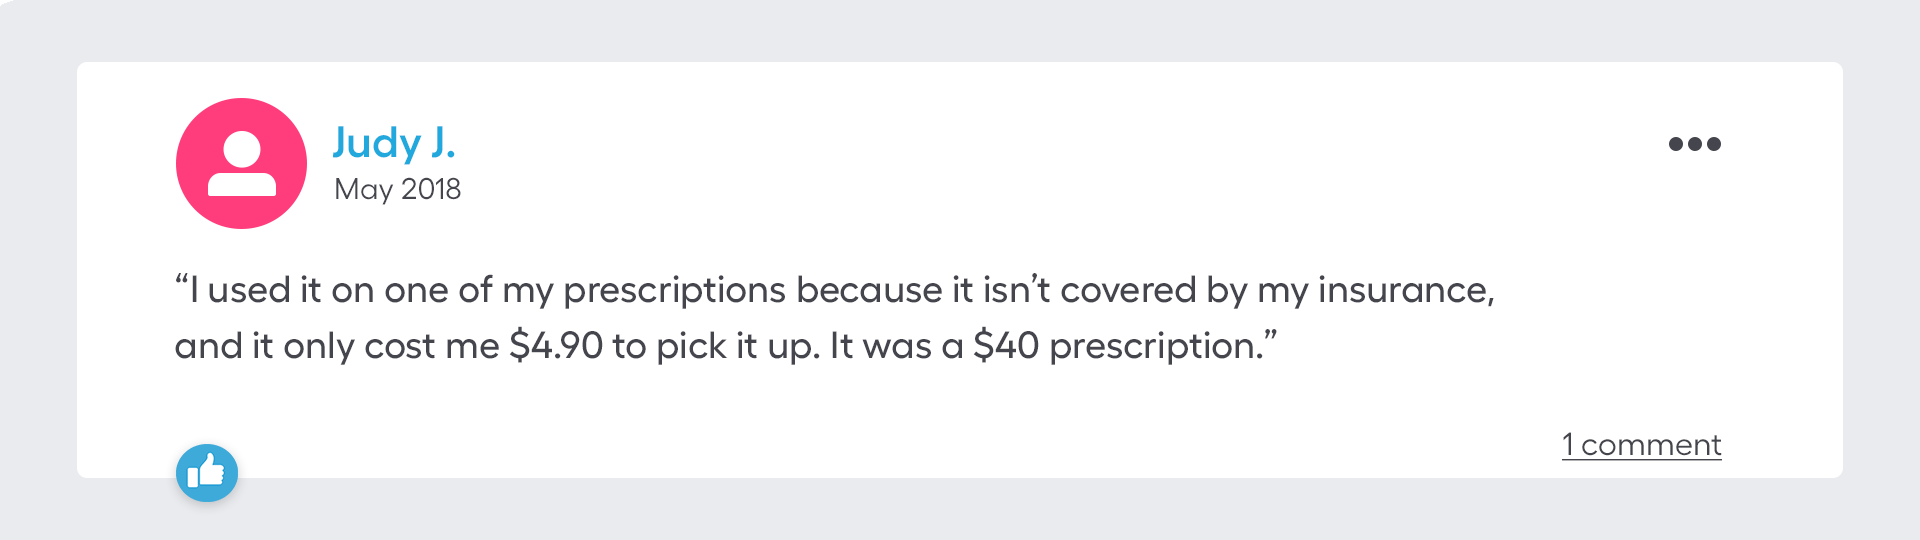  I used it on one of my prescriptions because it isn't covered by my insurance, and it only cost me $4.90 to pick it up. It was a $40 prescription.